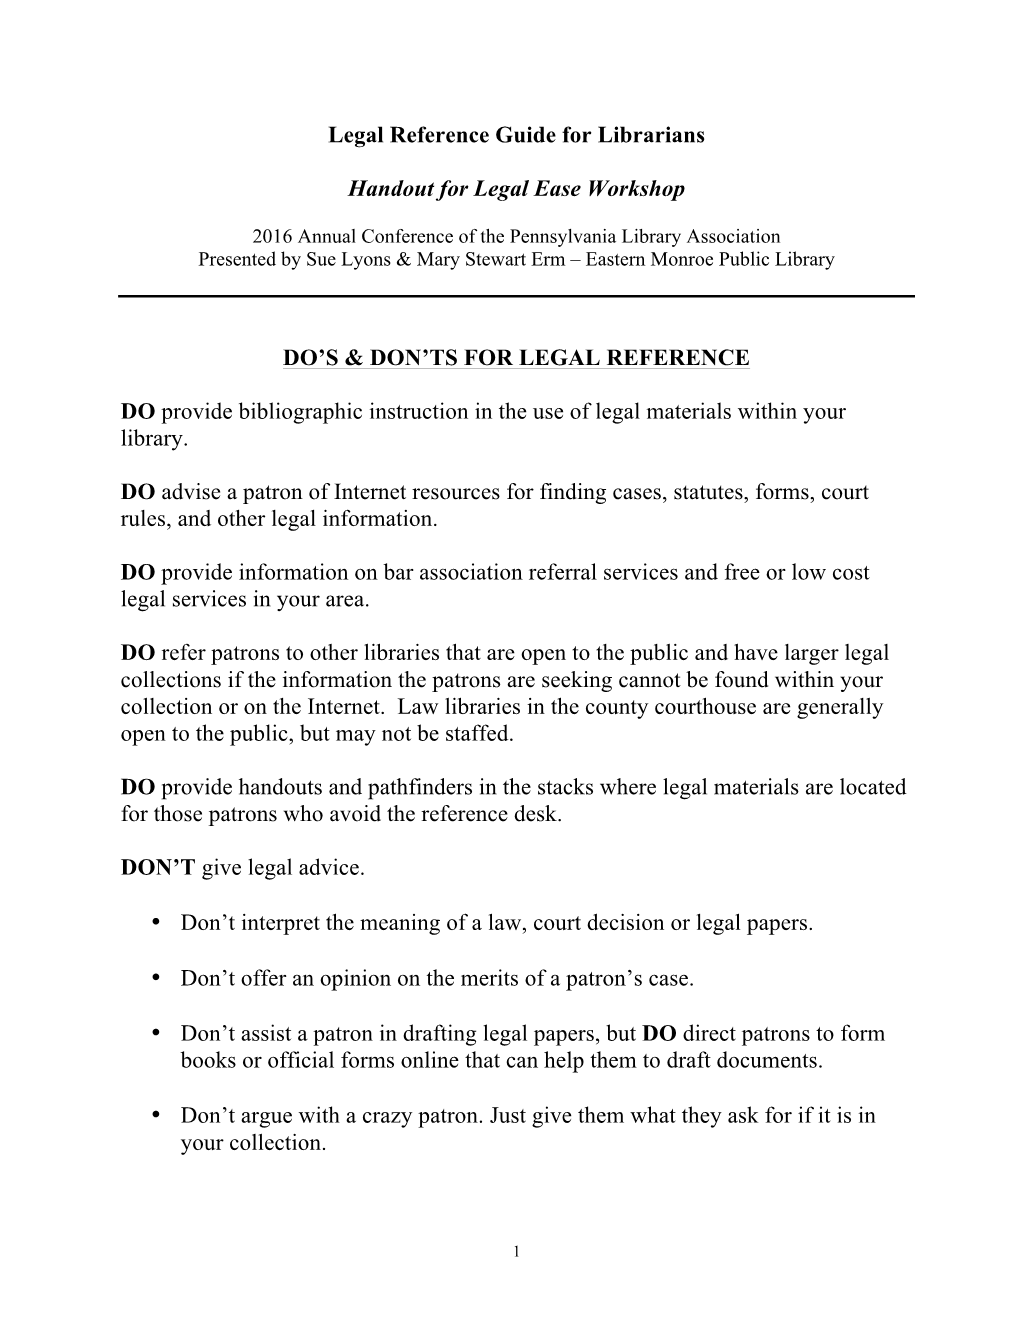 Do's & Don'ts for Legal Reference